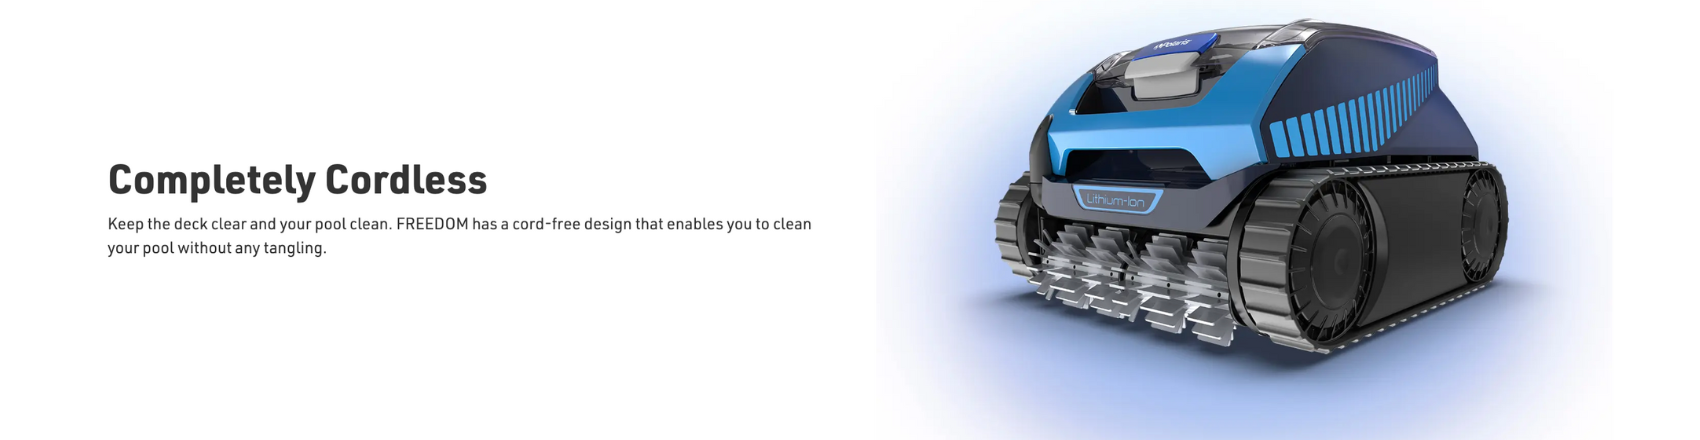 Polaris Cuts the Cord: Introducing Cordless Cleaners - Vita Filters